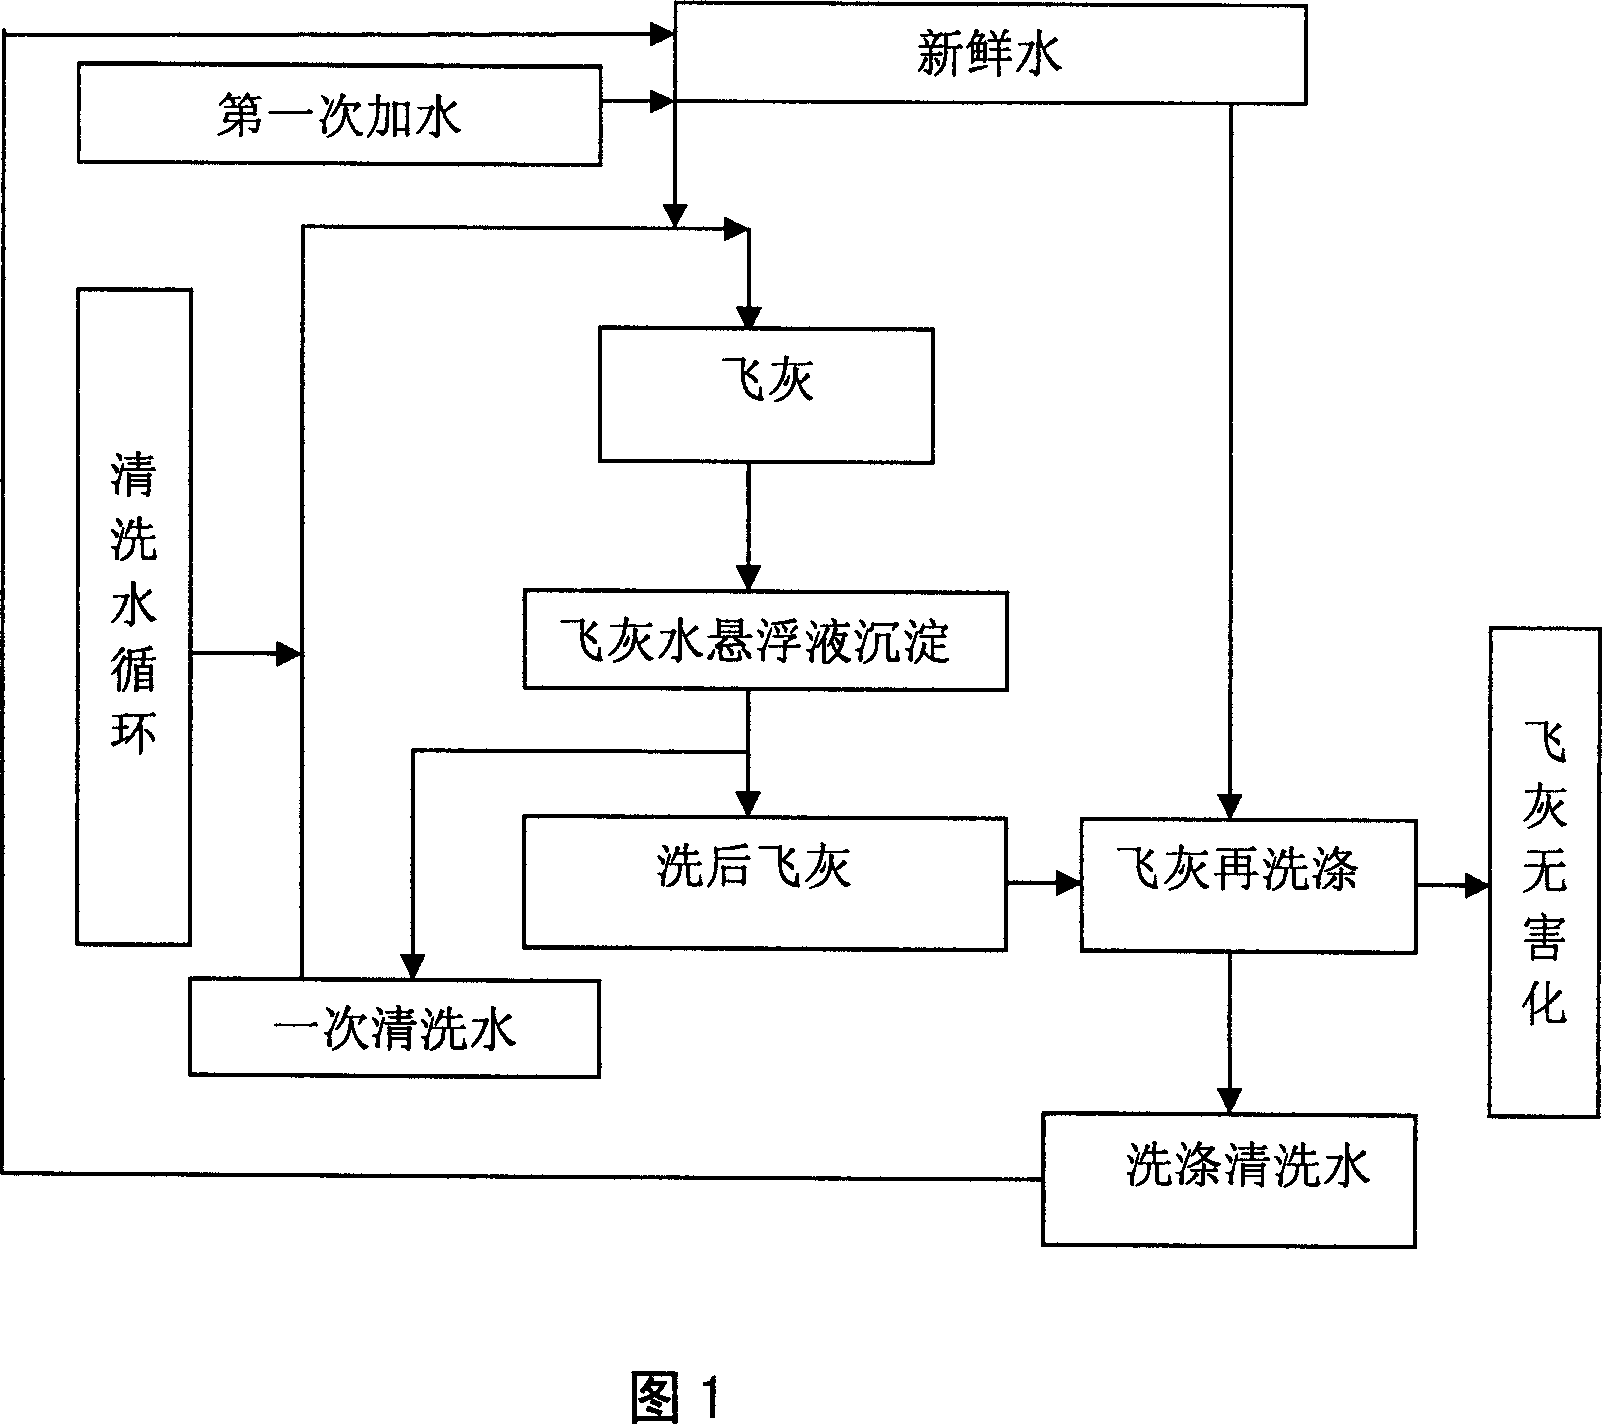 Water washing pretreatment method for making fly-ash from incineration harmless